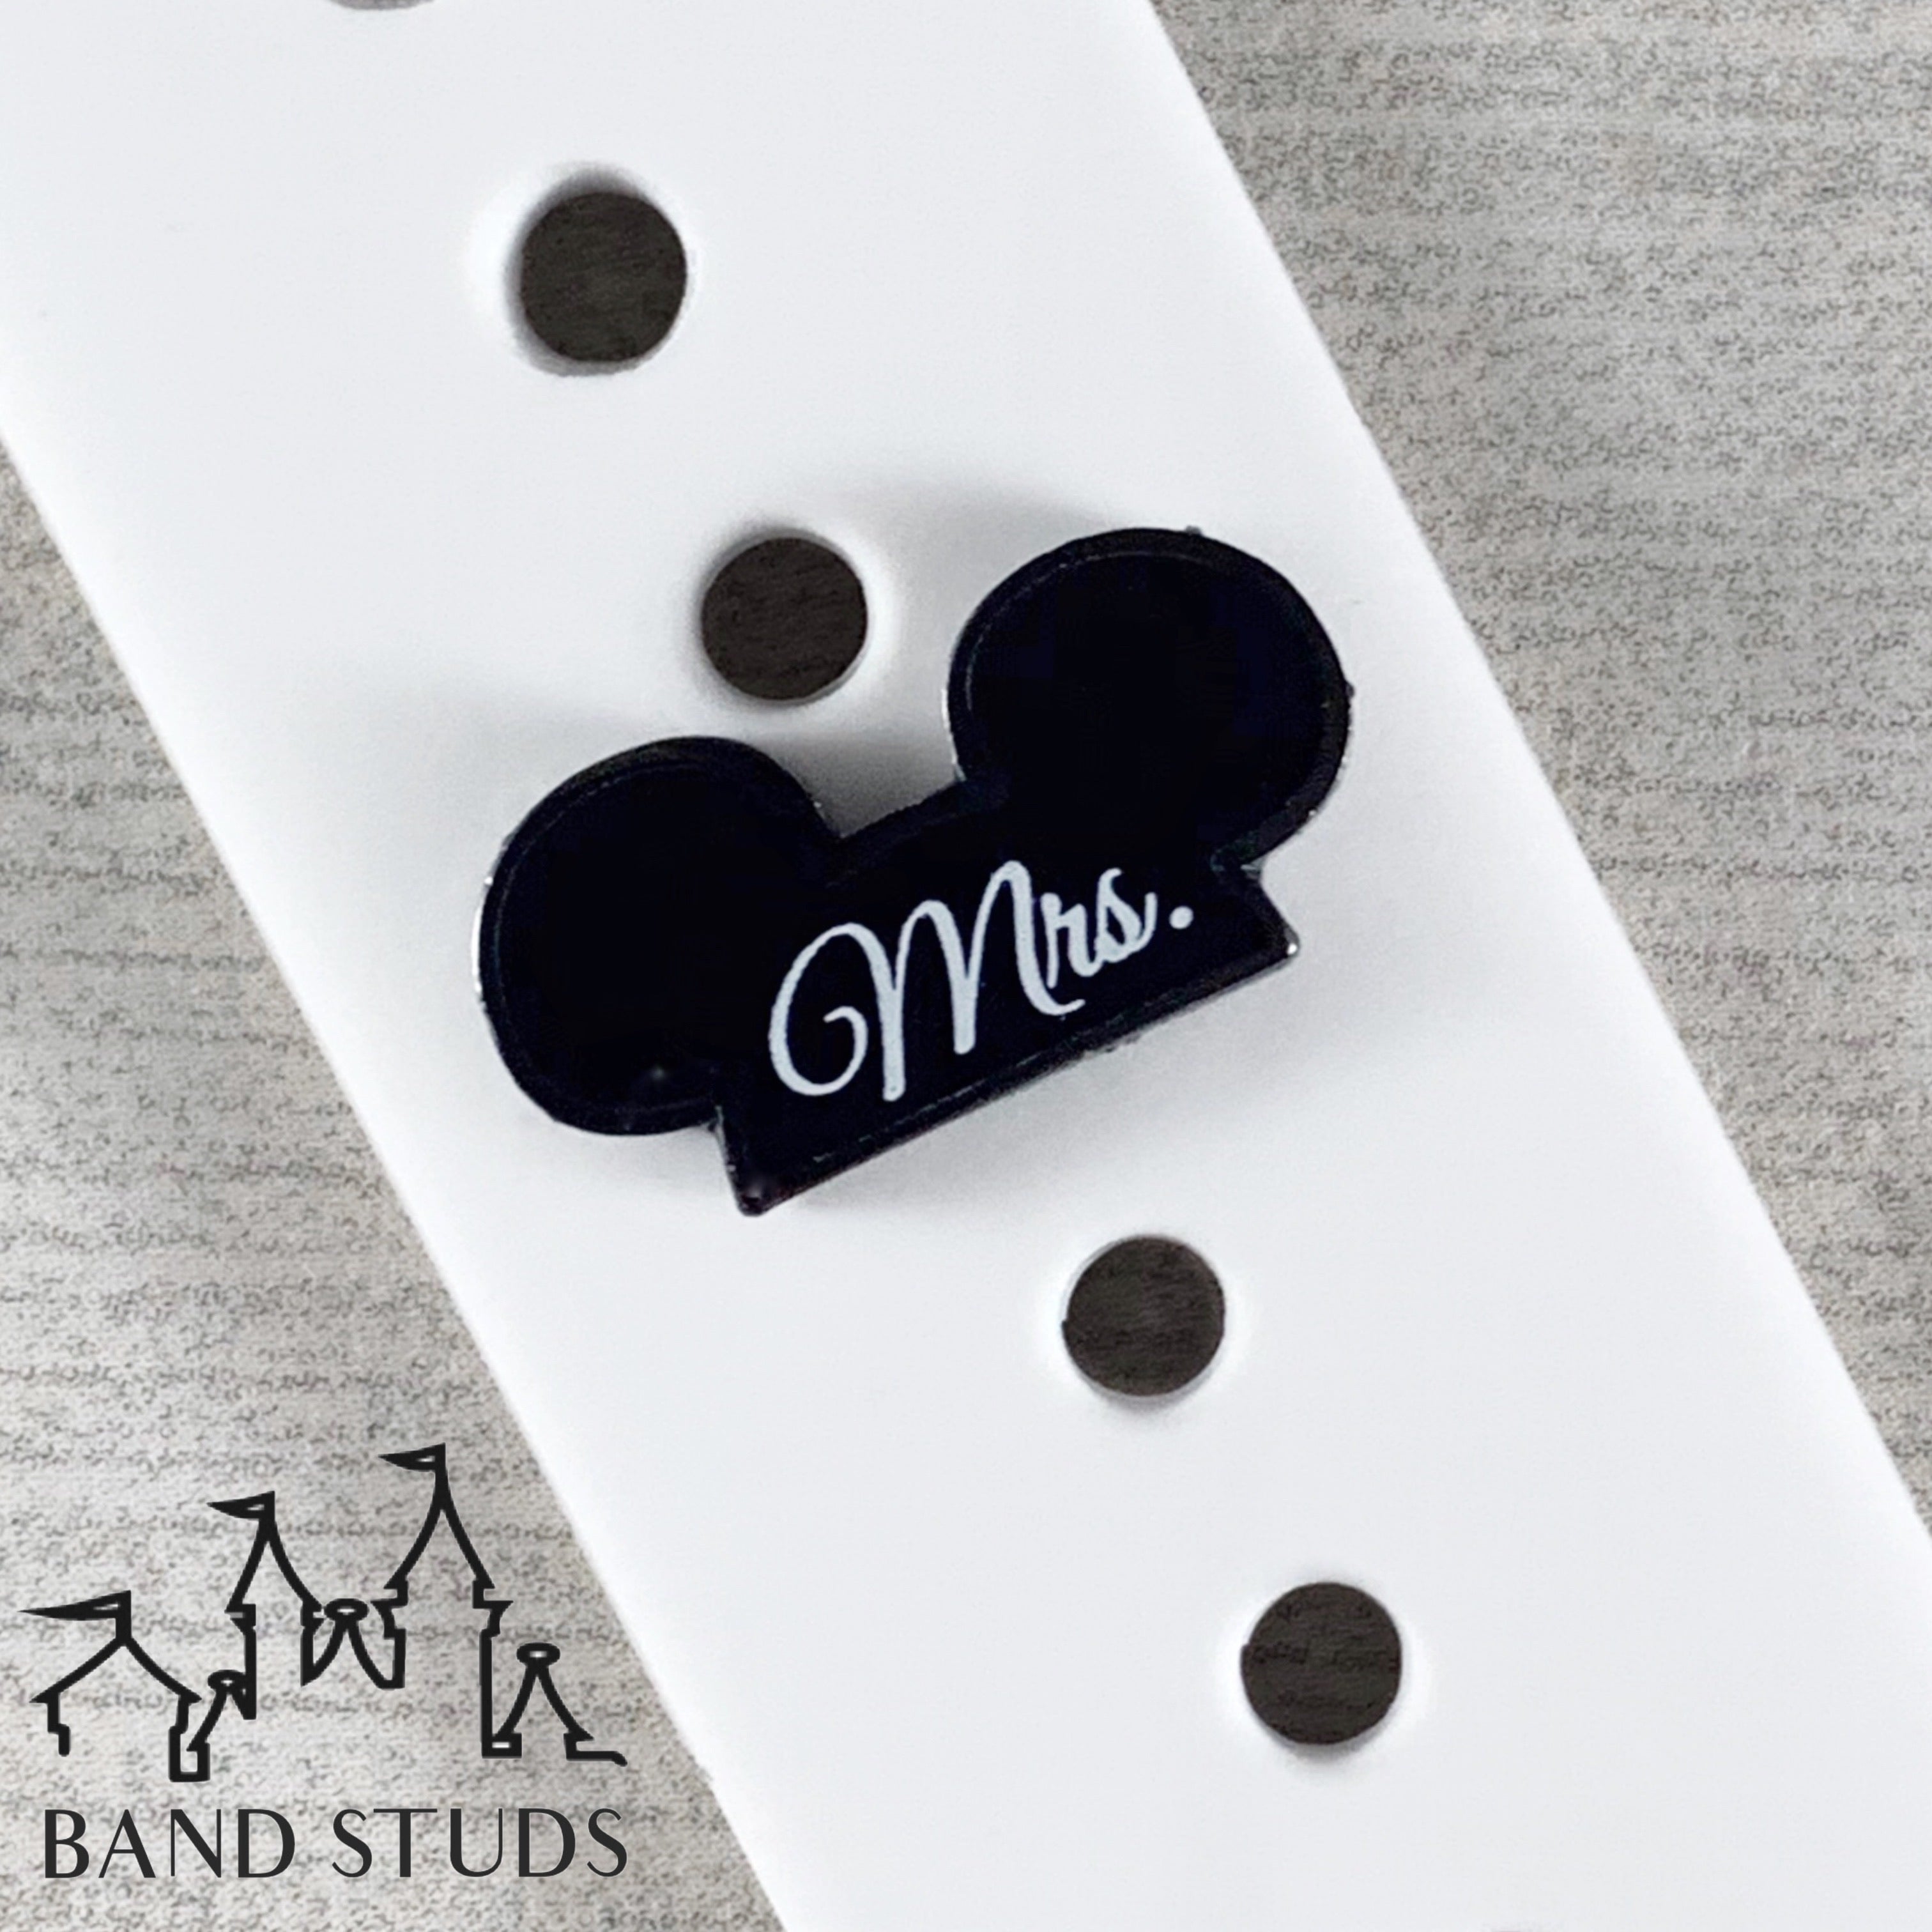 Band Stud® - Bridal Collection - Happily Ever After